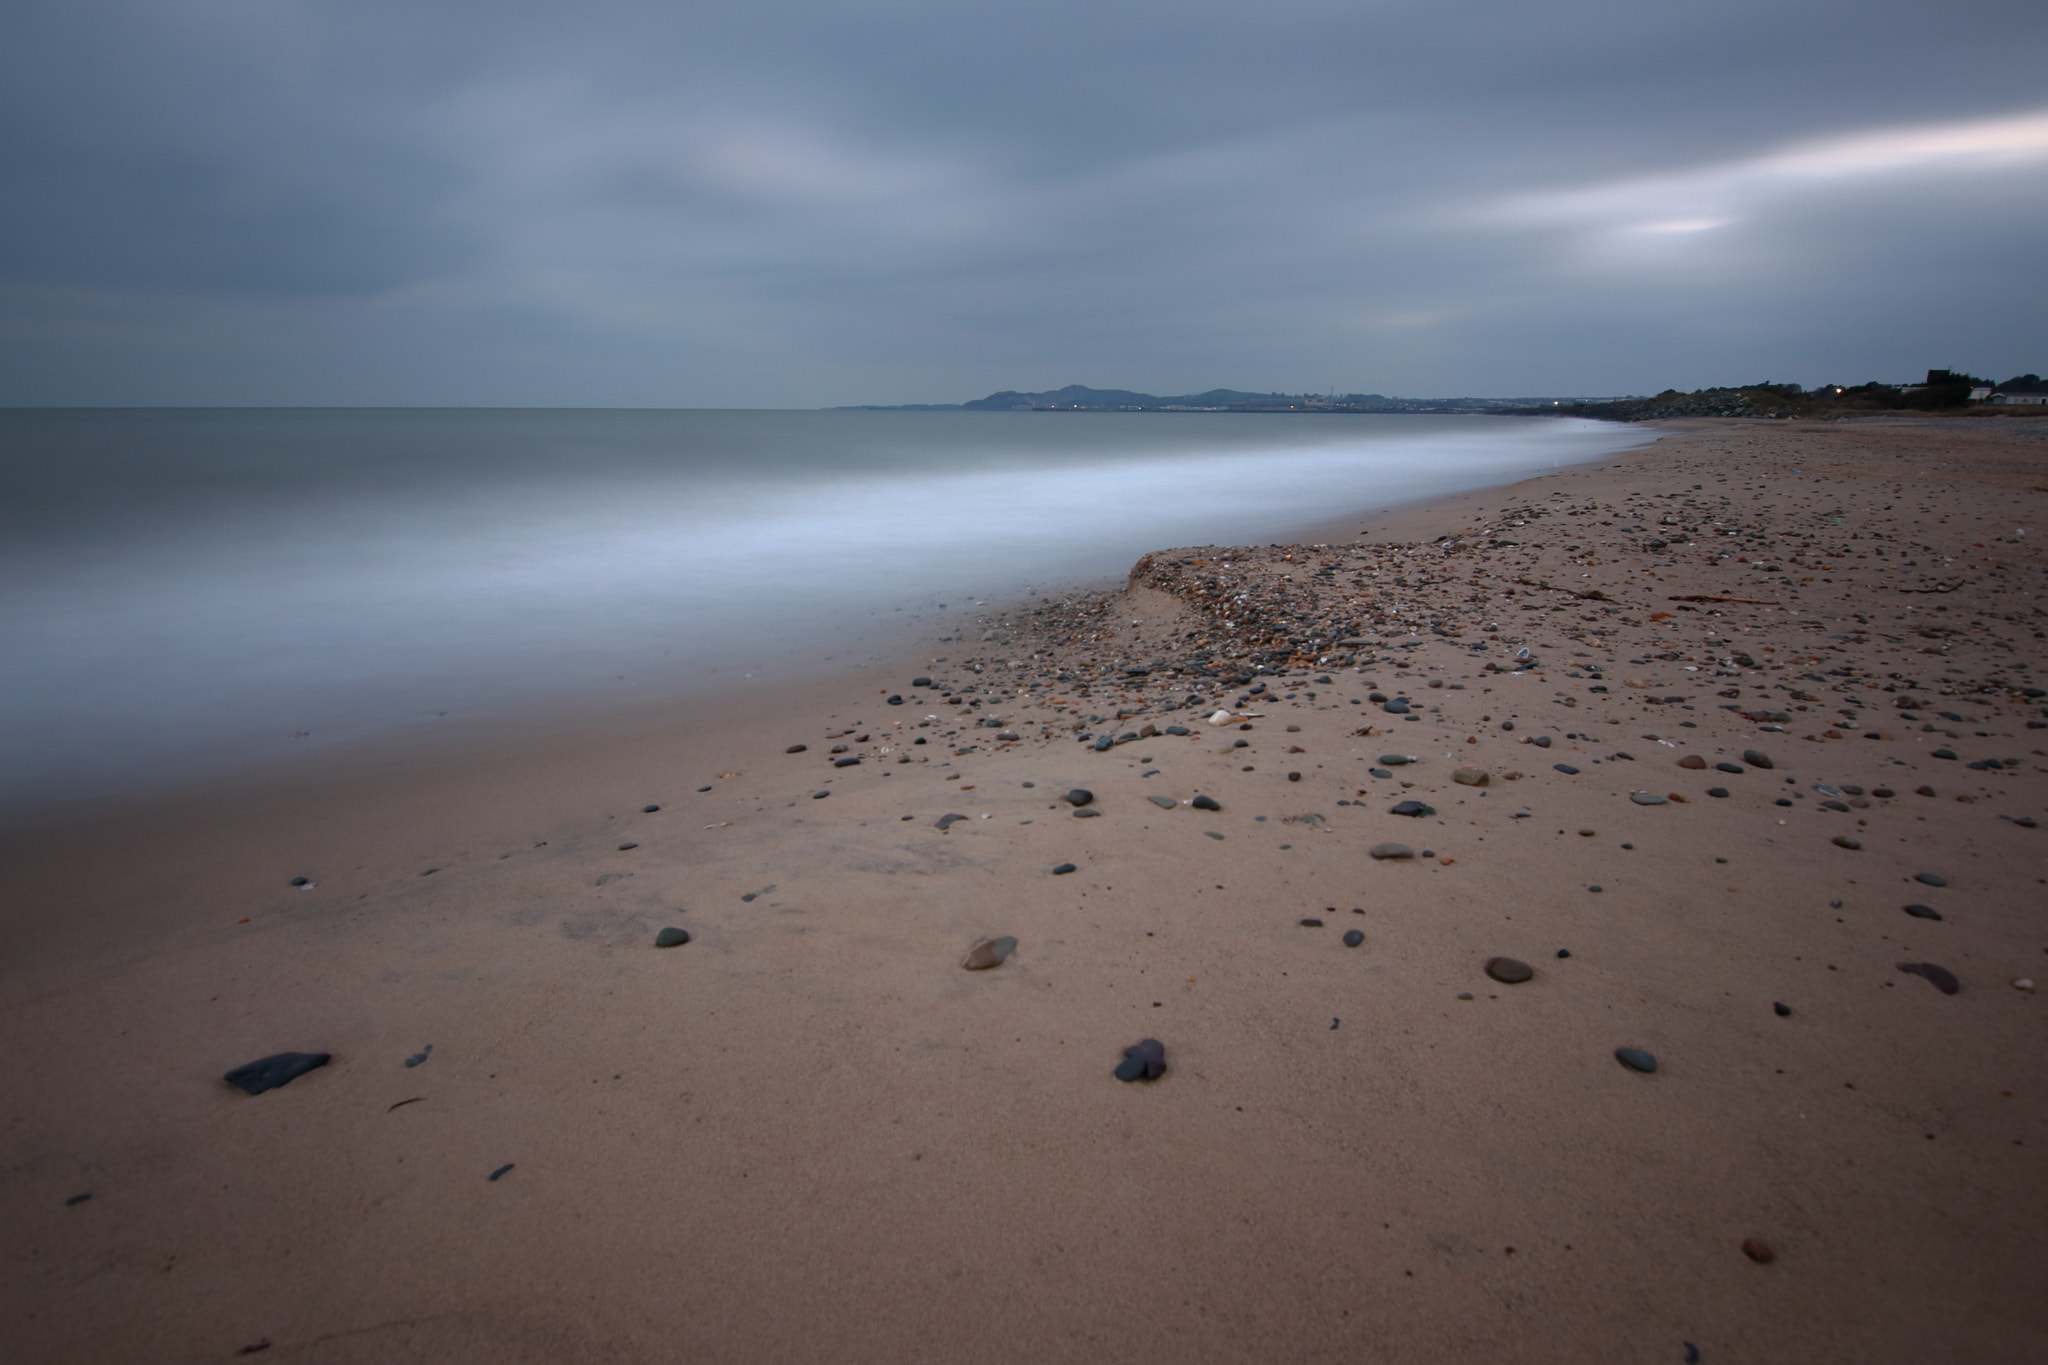 Tokina AT-X 11-20 F2.8 PRO DX Aspherical 11-20mm f/2.8 sample photo. North beach, arklow. photography